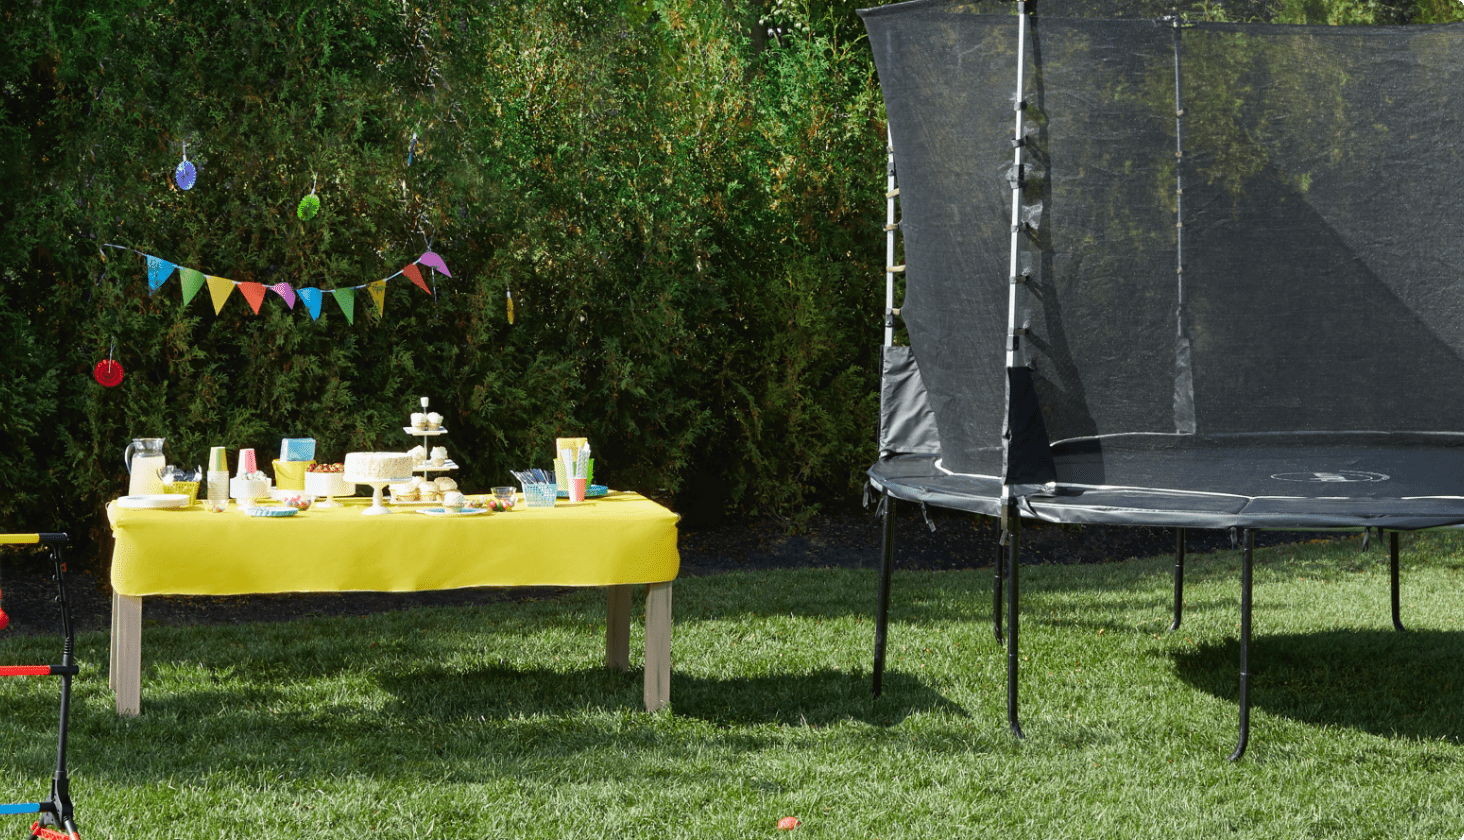 Birthday party table set up with yellow table cloth, birthday cake and party cups beside a trampoline in a backyard.